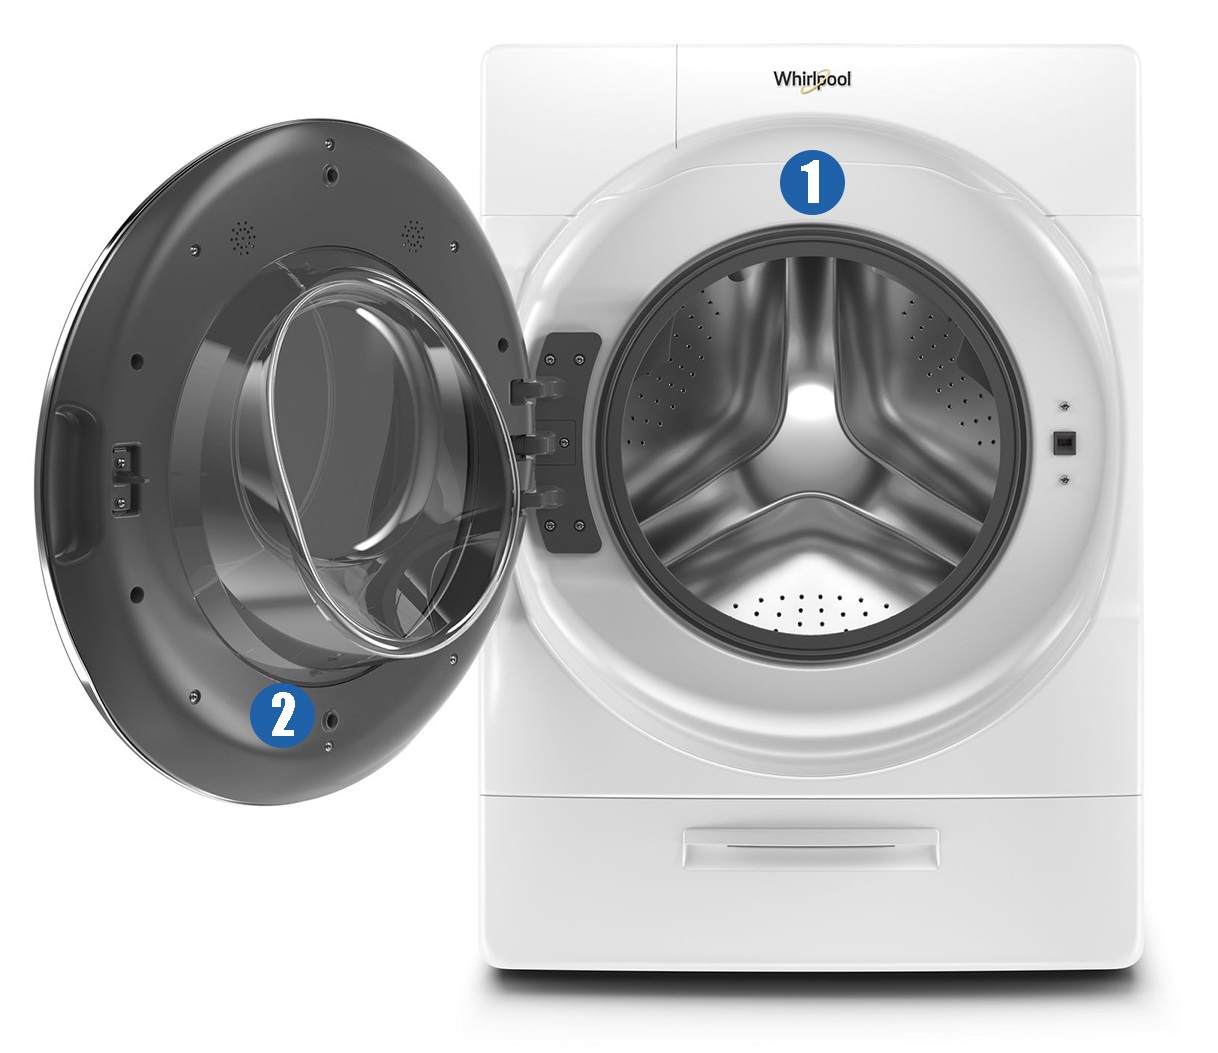 Locating the Model Number on a Front Load Washer